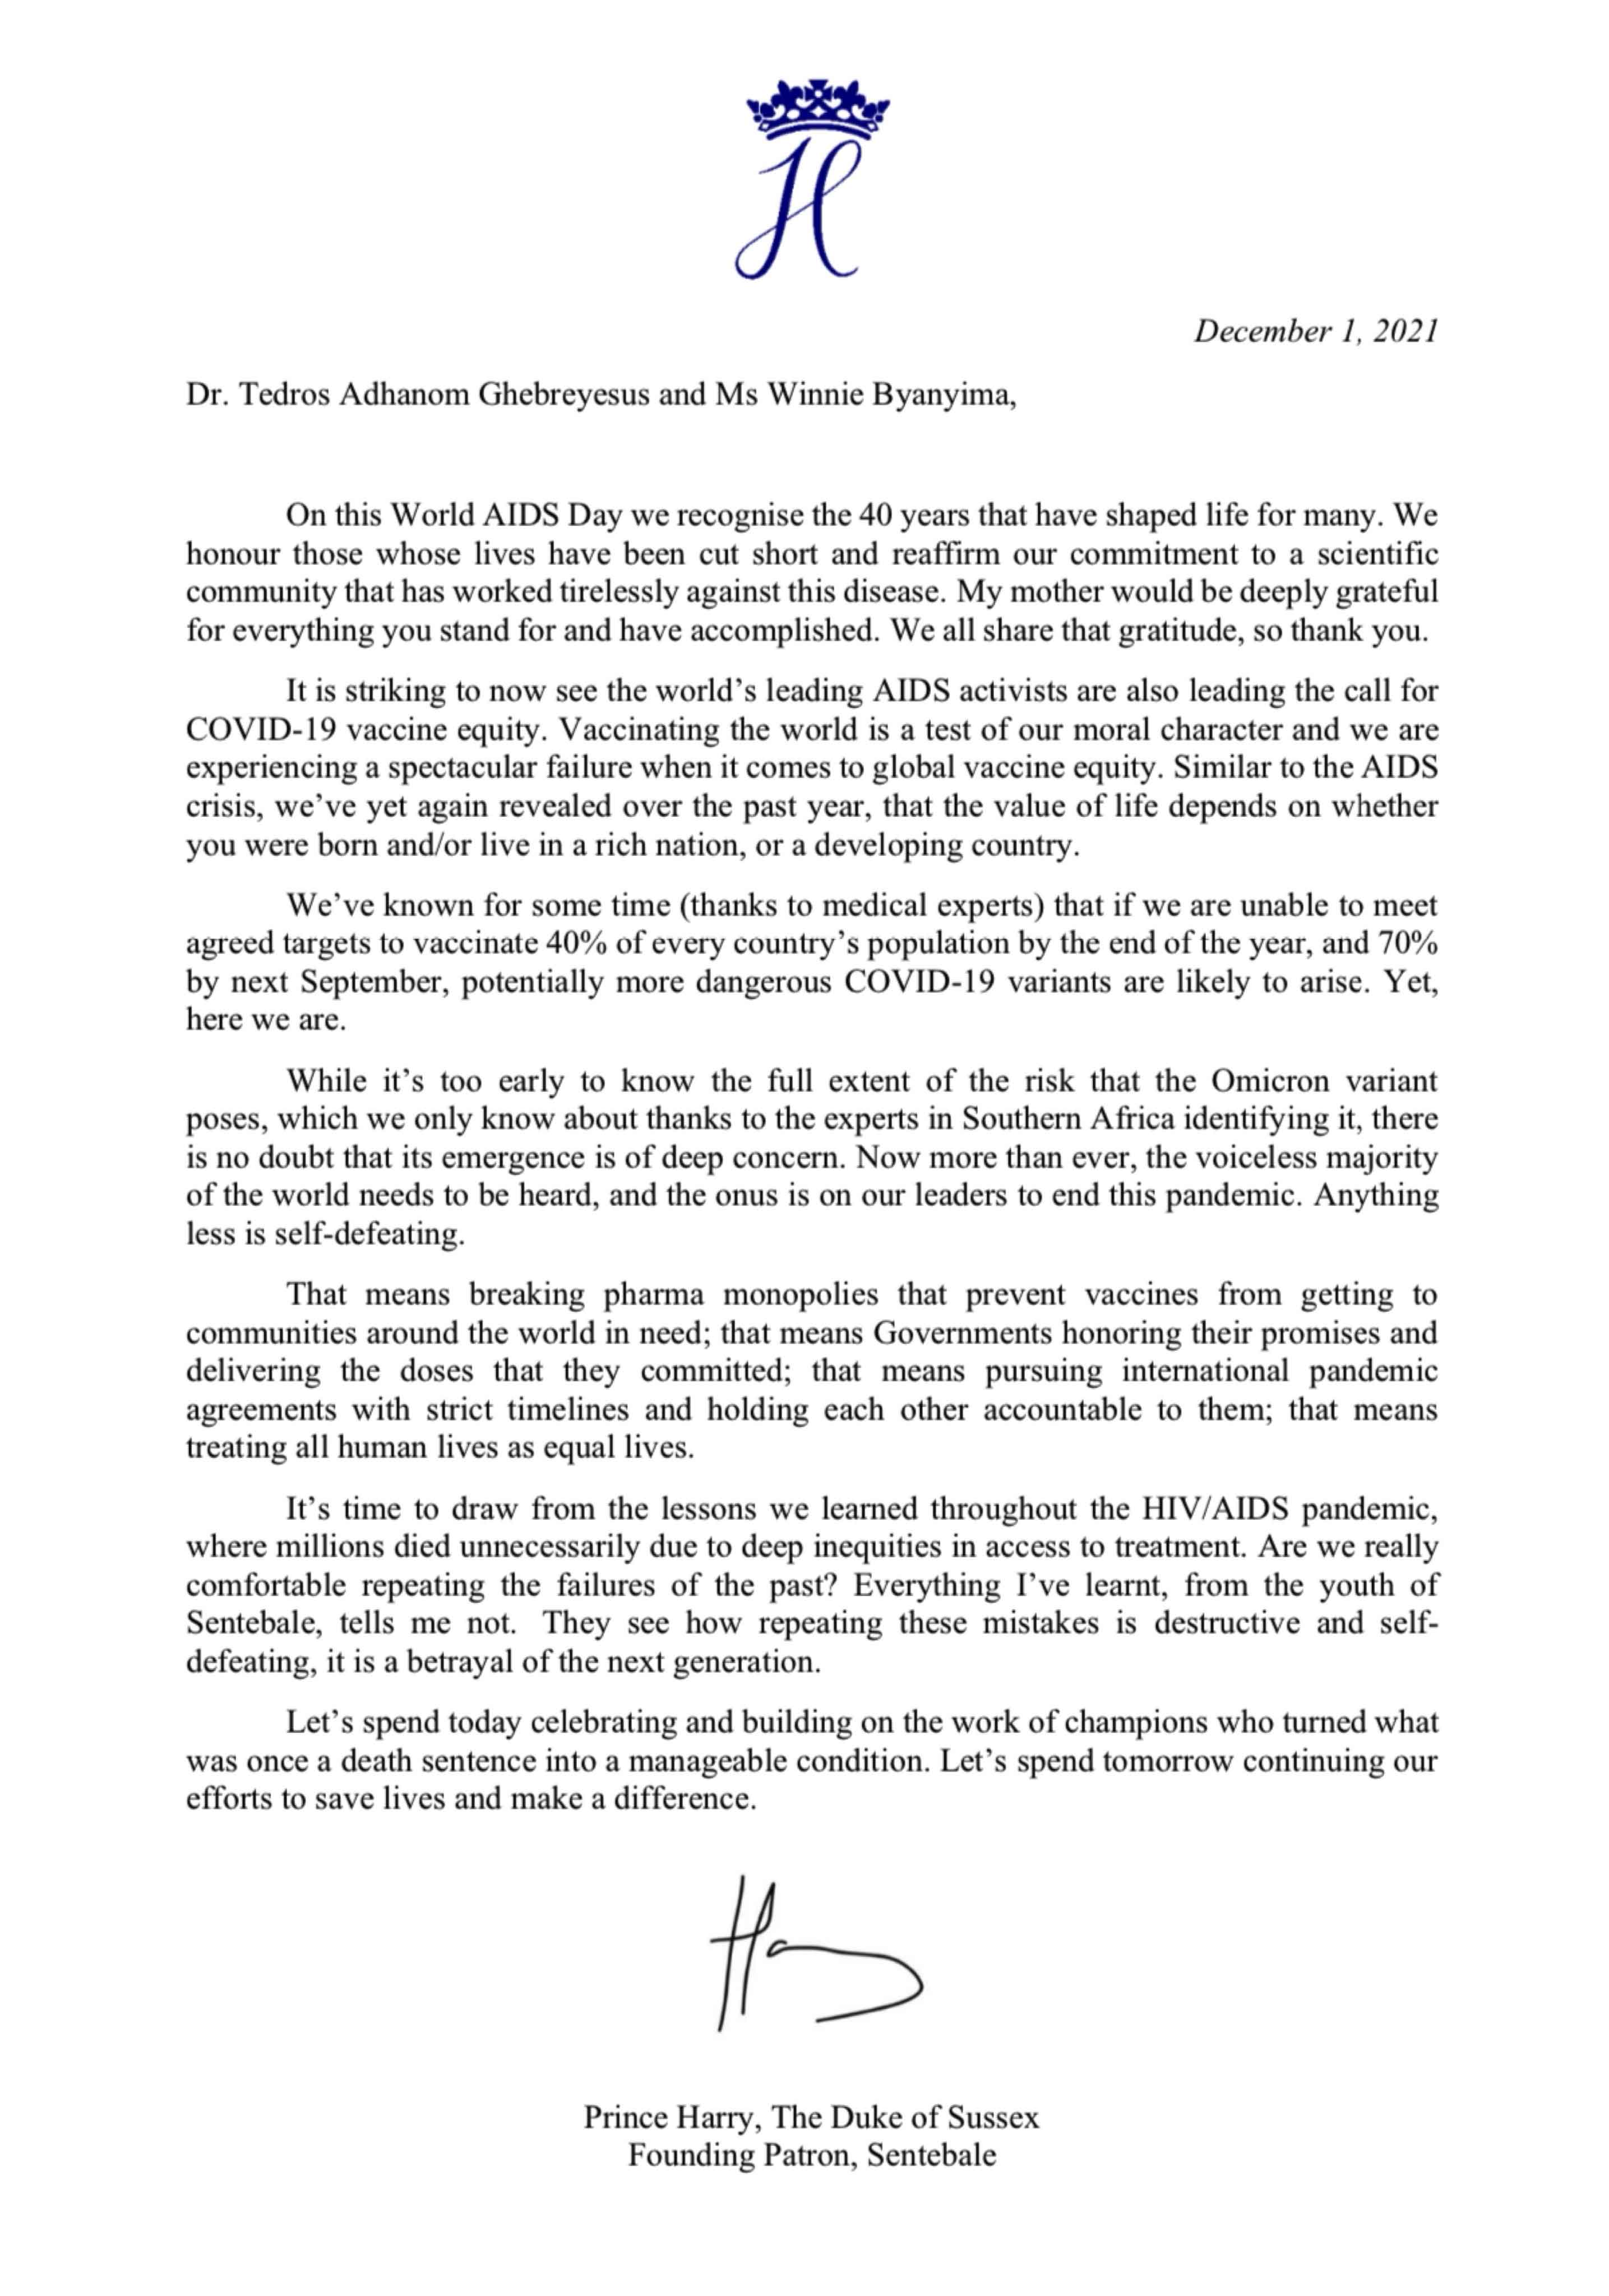 Full text of Prince Harrys letter read out at  UN AIDSs World AIDS Day event